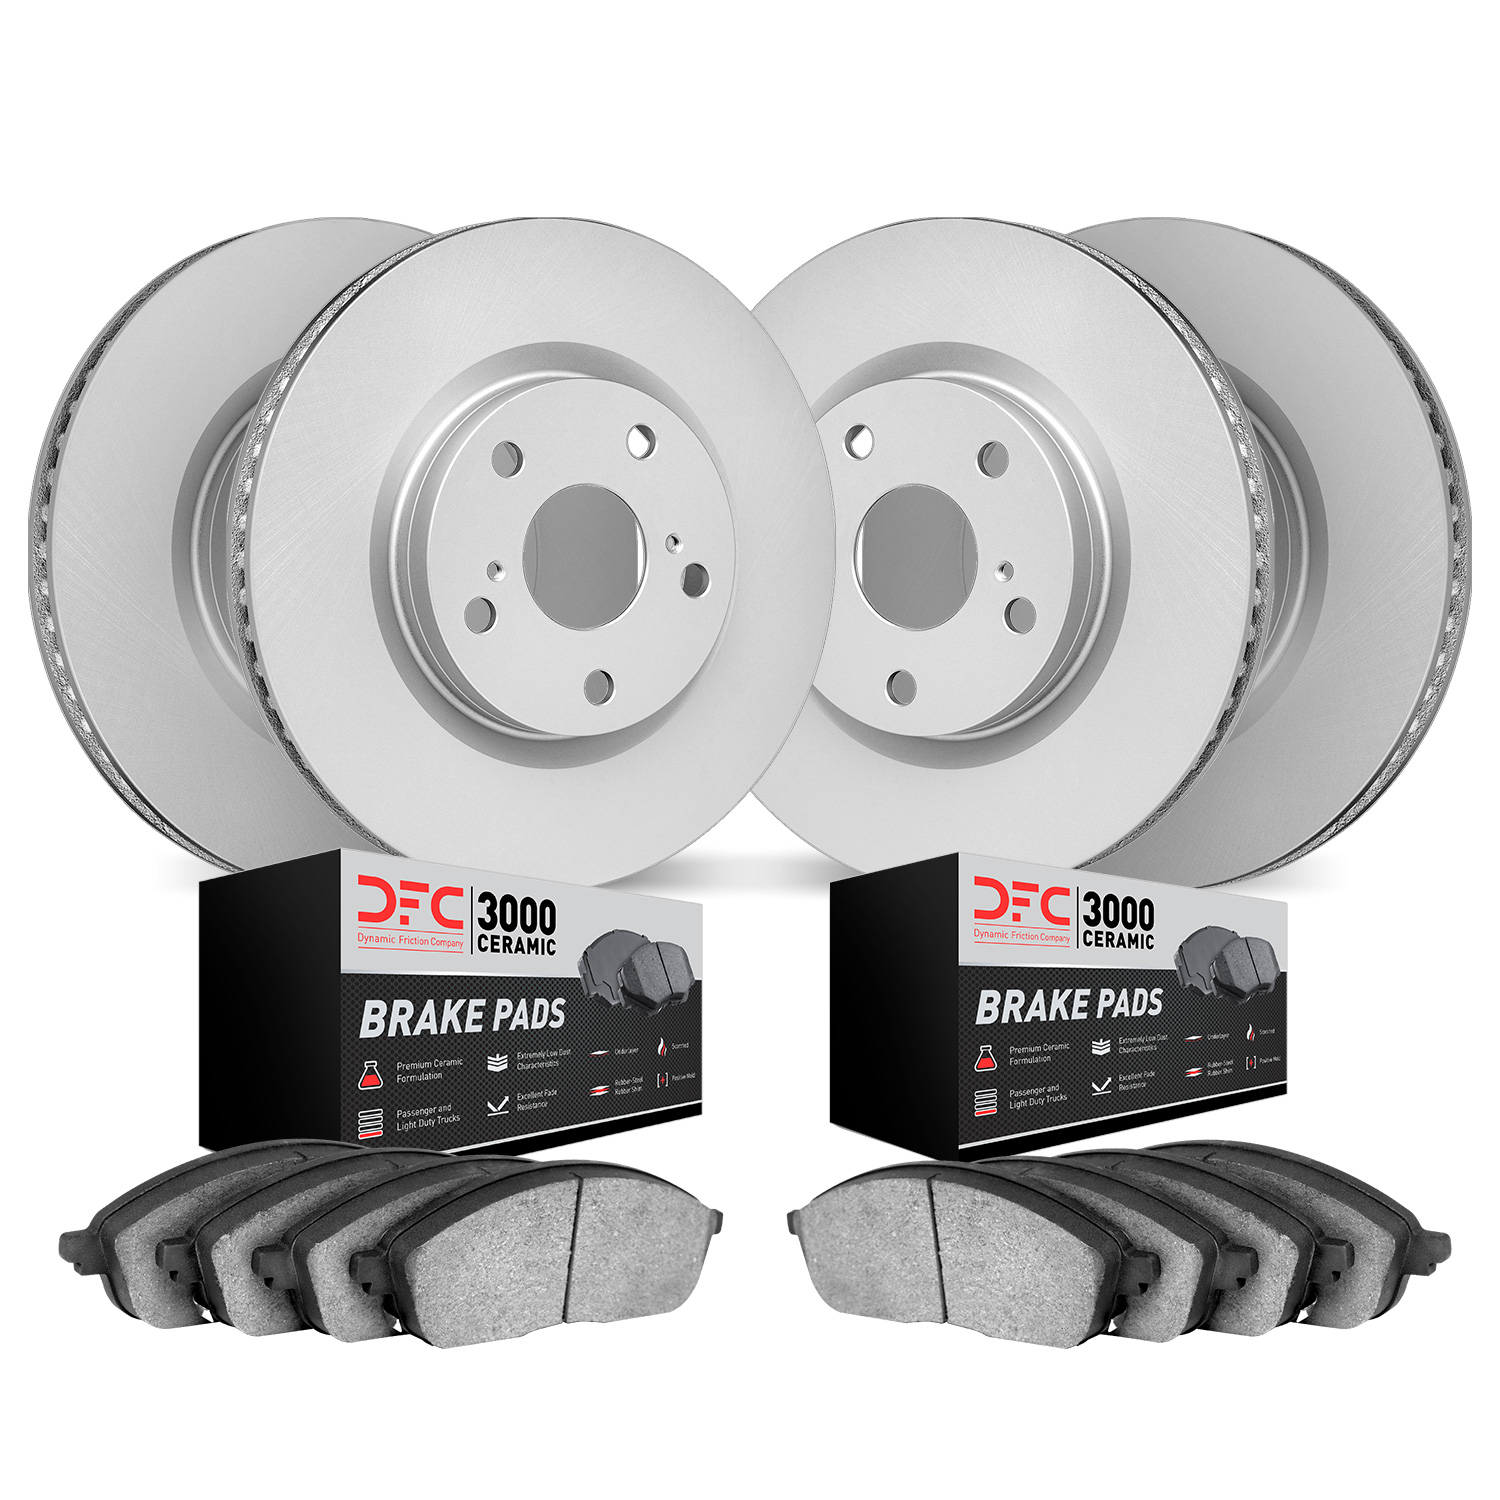 4304-73036 Geospec Brake Rotors with 3000-Series Ceramic Brake Pads Kit, 2012-2017 Audi/Volkswagen, Position: Front and Rear